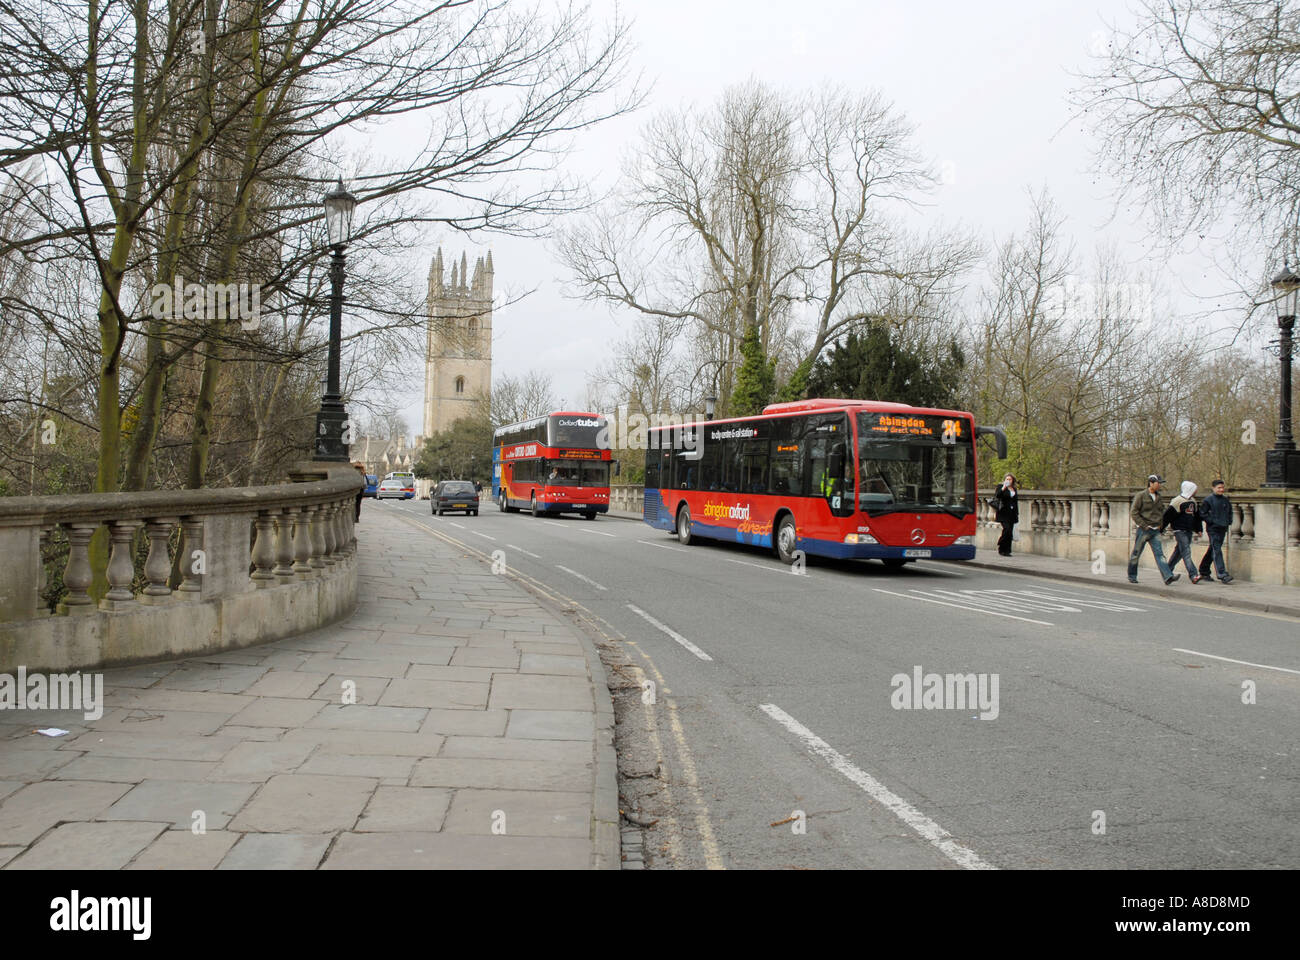 Buses and other traffic on Magdalen bridge, Oxford Stock Photo